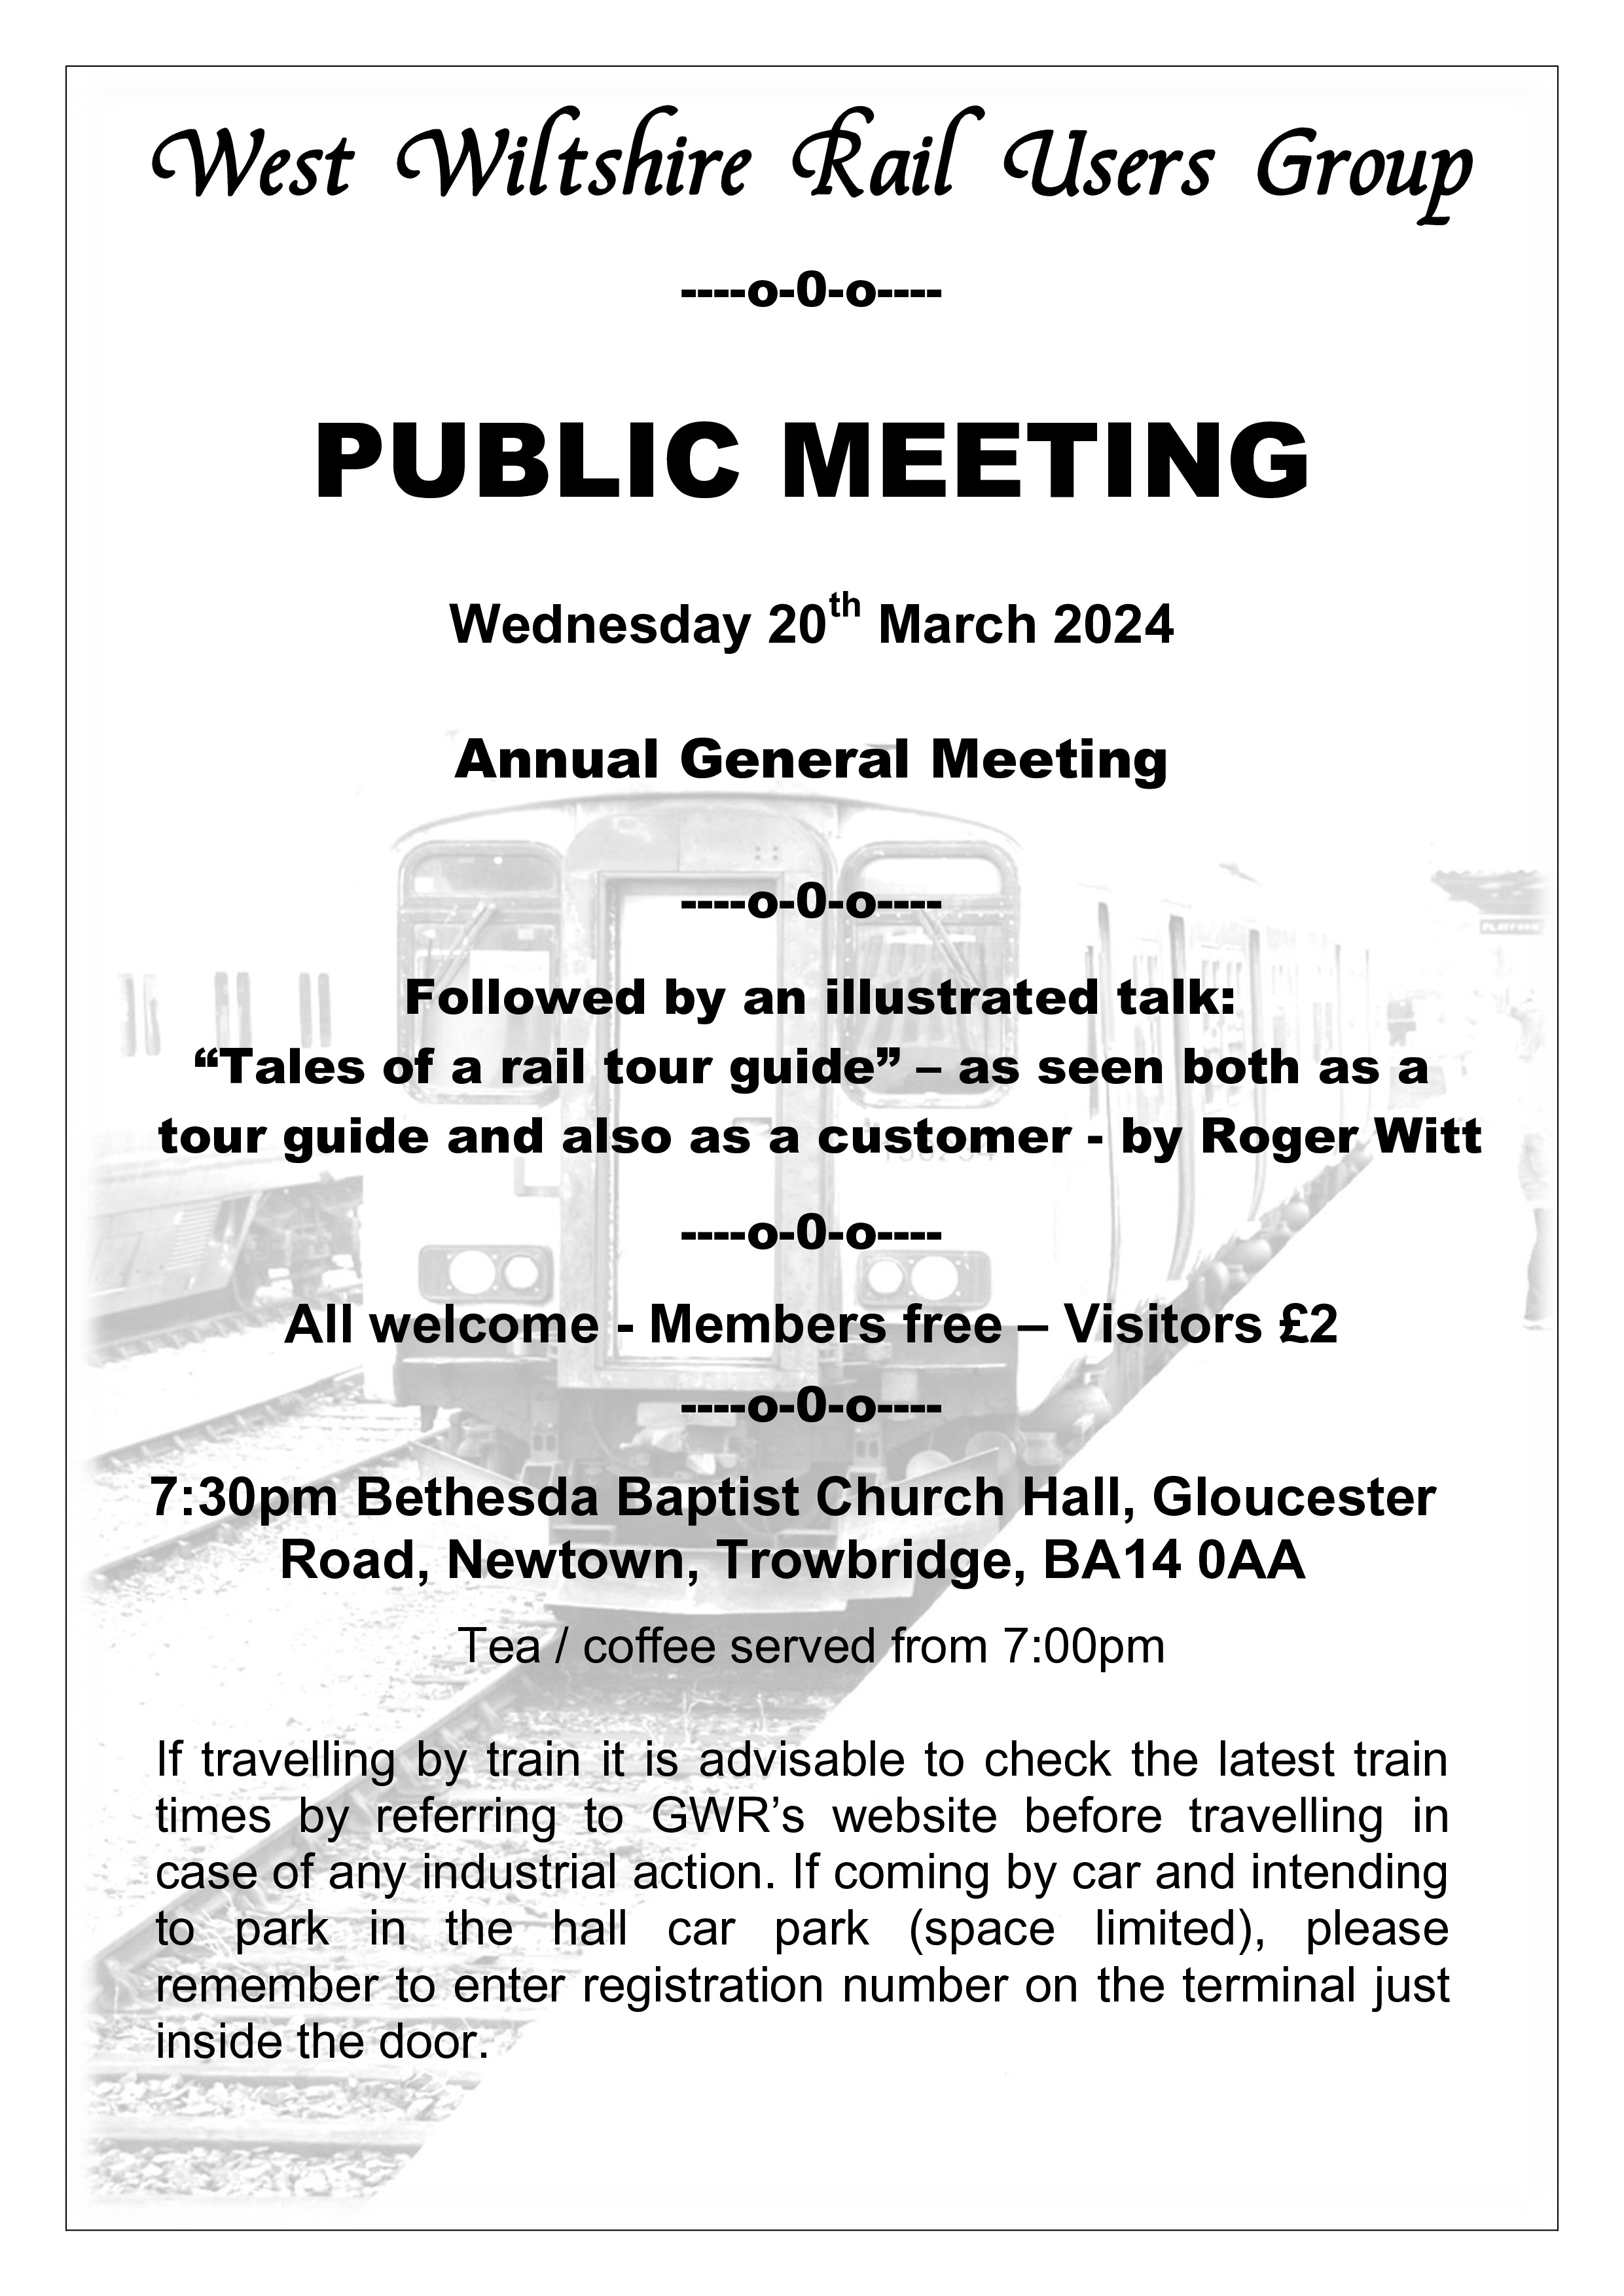 Details of the next WWRUG meeting